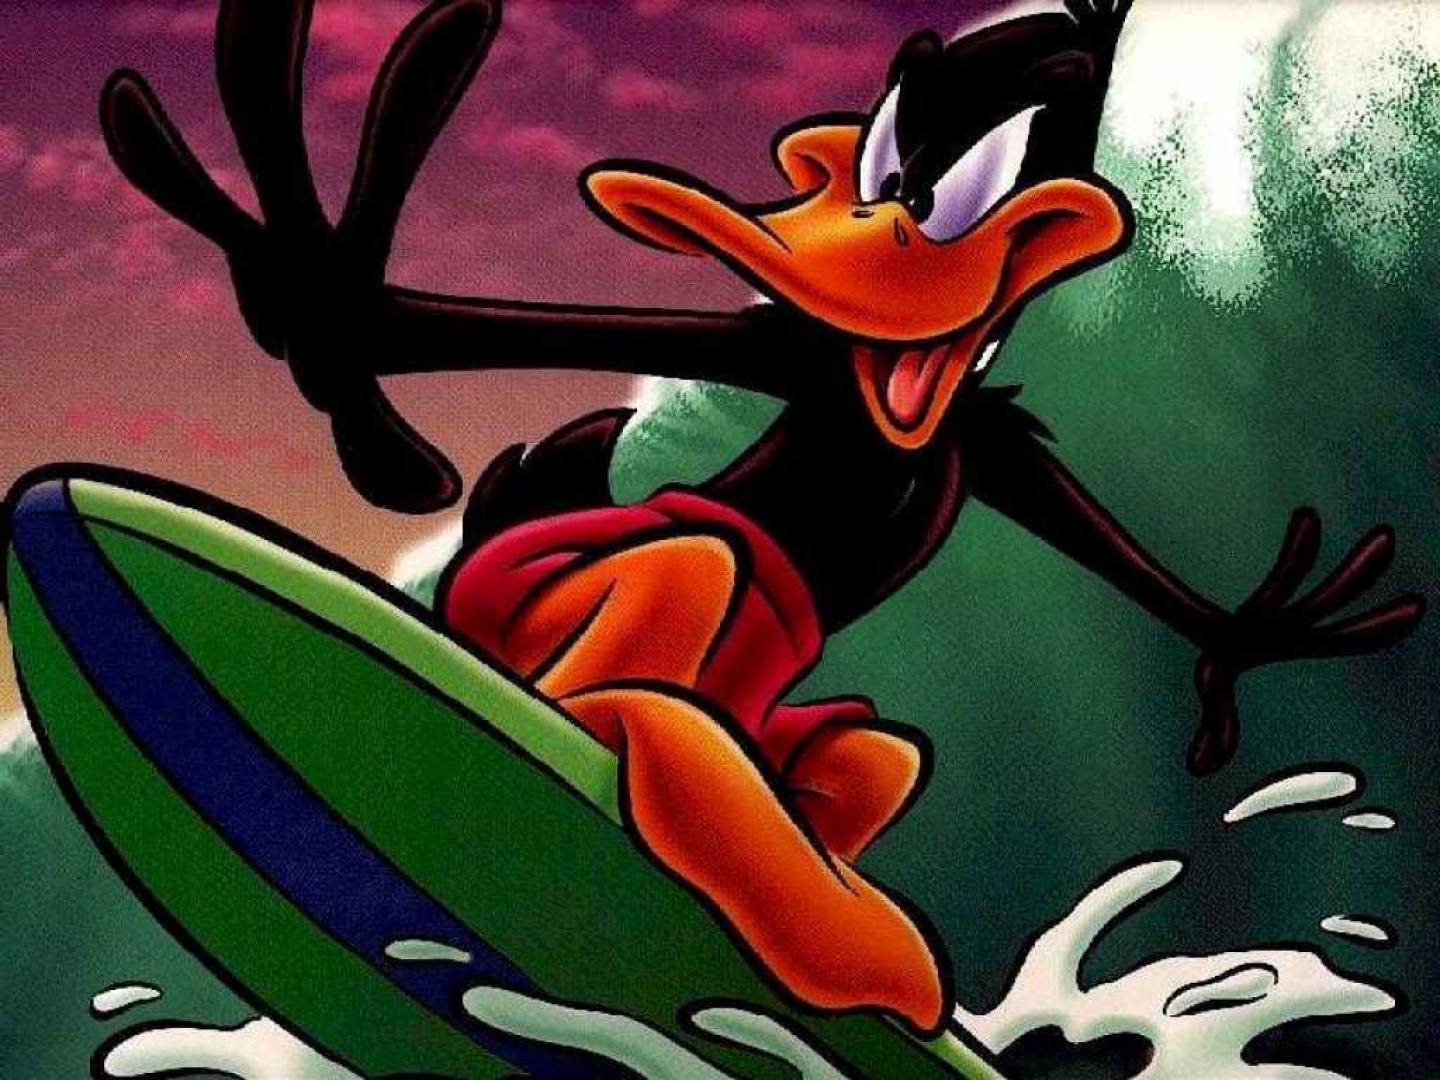 Daffy Duck Wallpapers